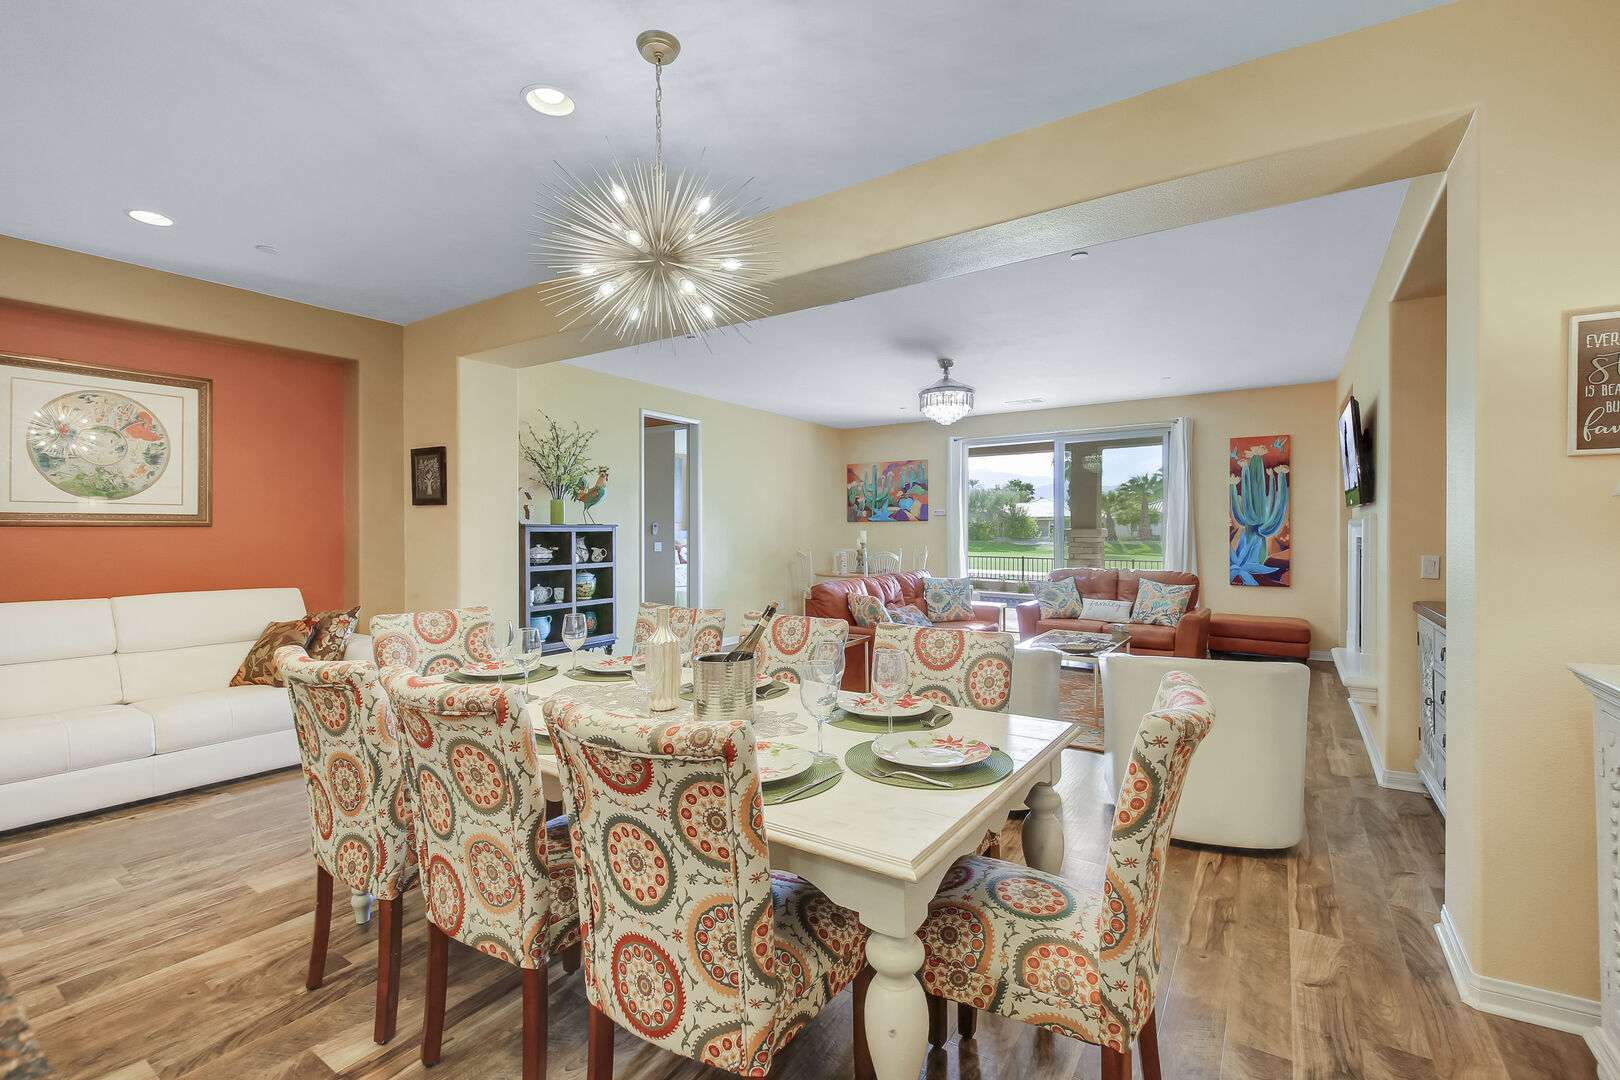 The casual dining area features a dining table with seating for eight.